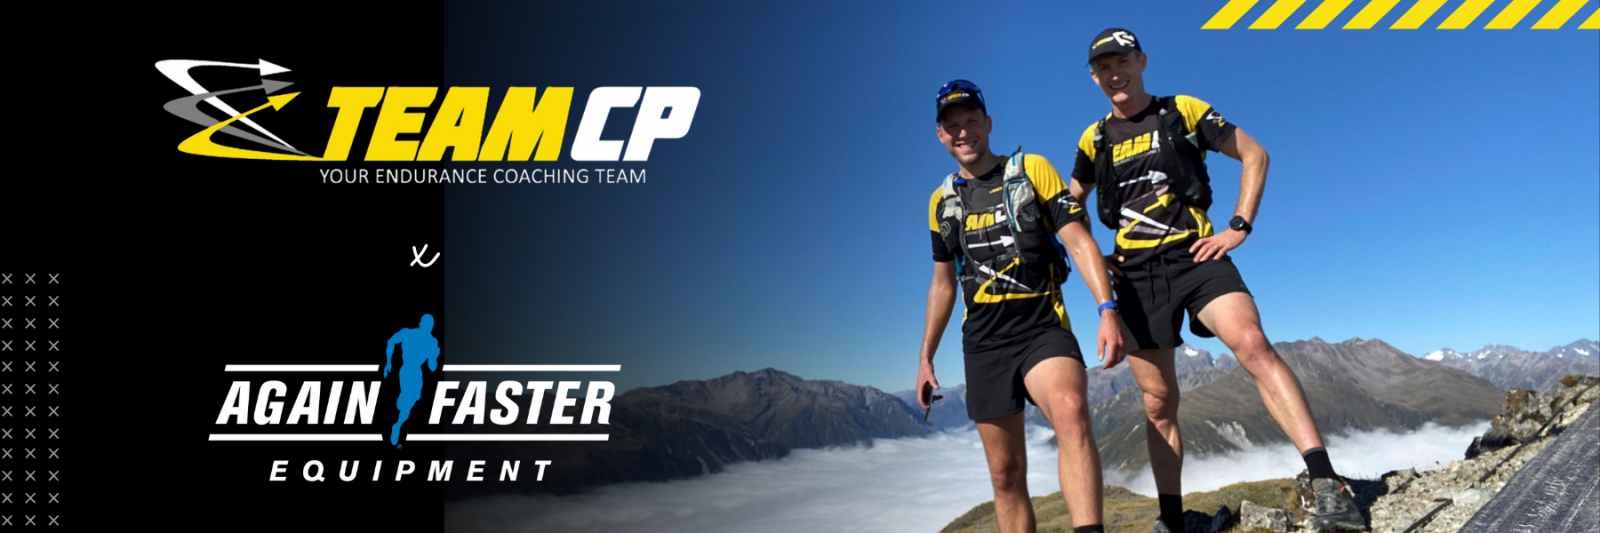 Team CP in Partnership with Again Faster New Zealand